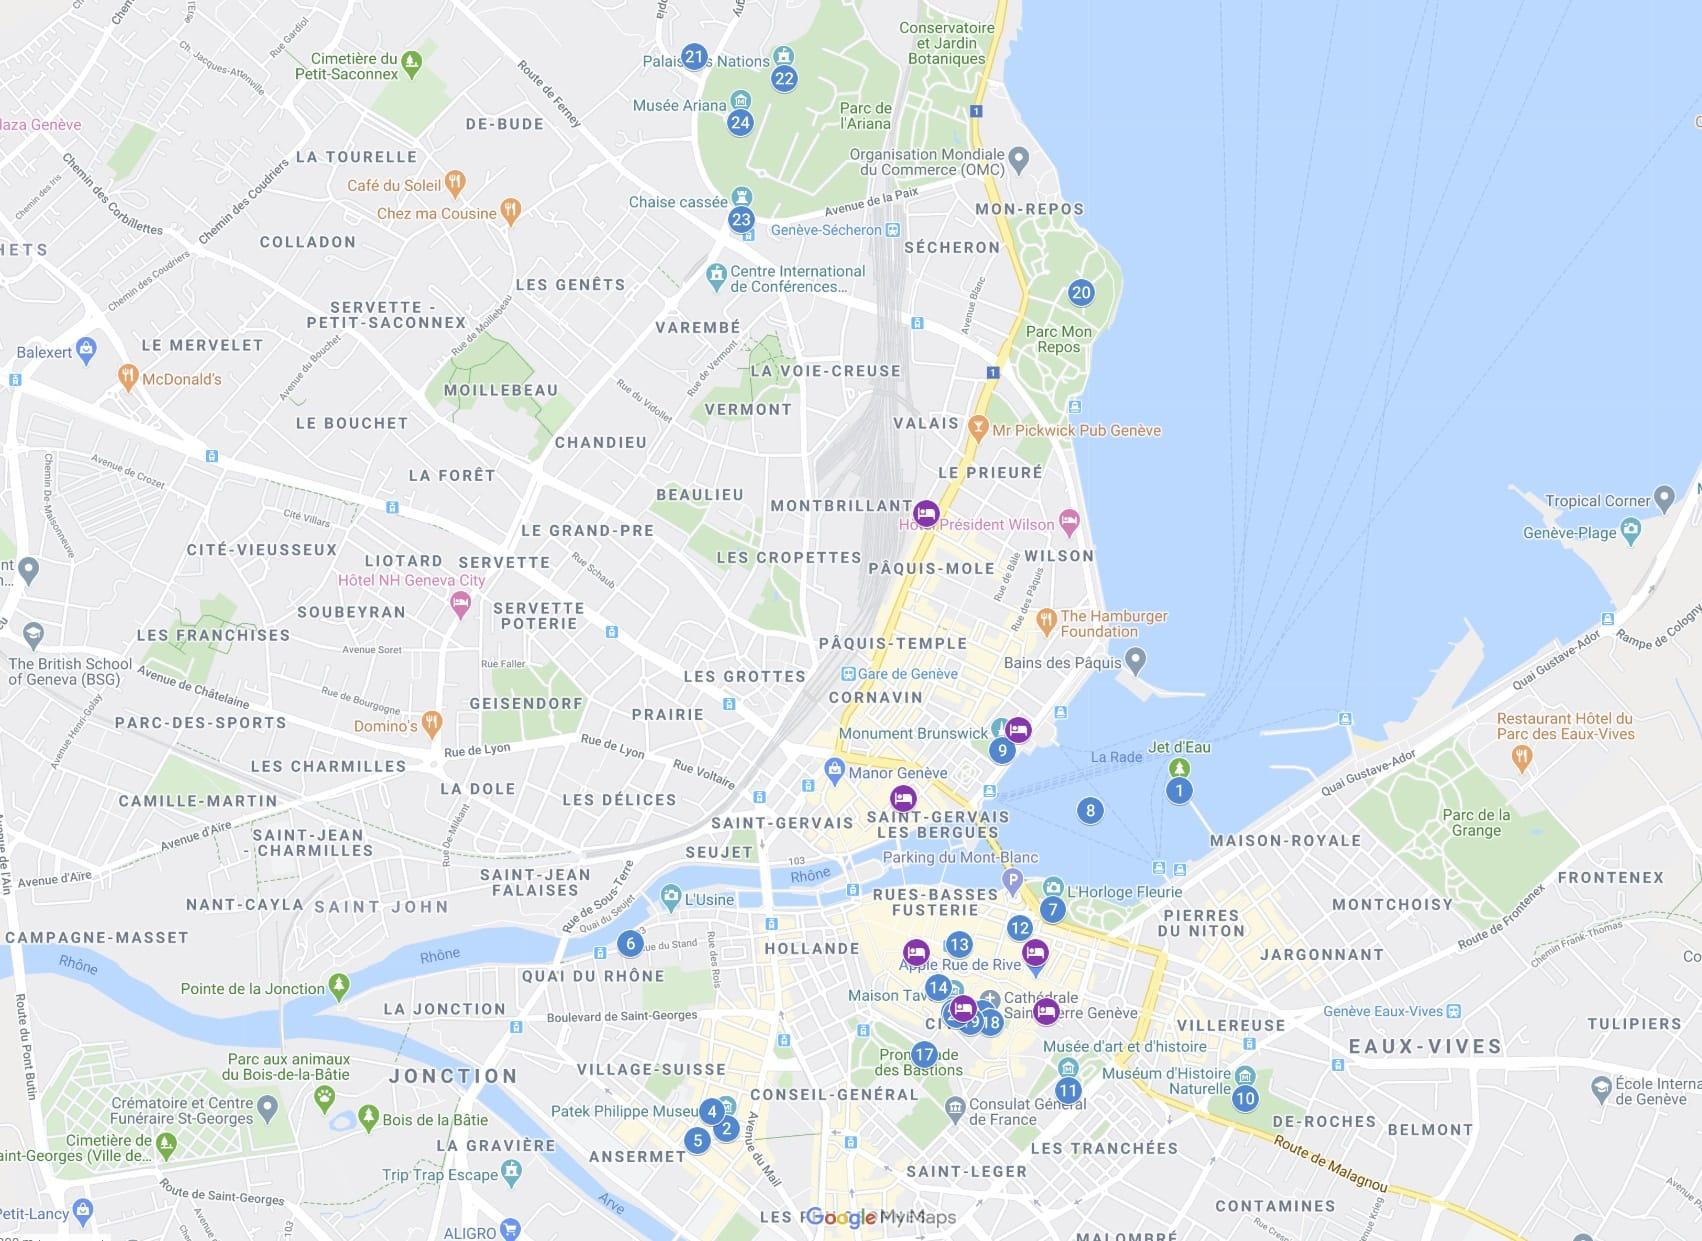 Map of Things to do in Geneva